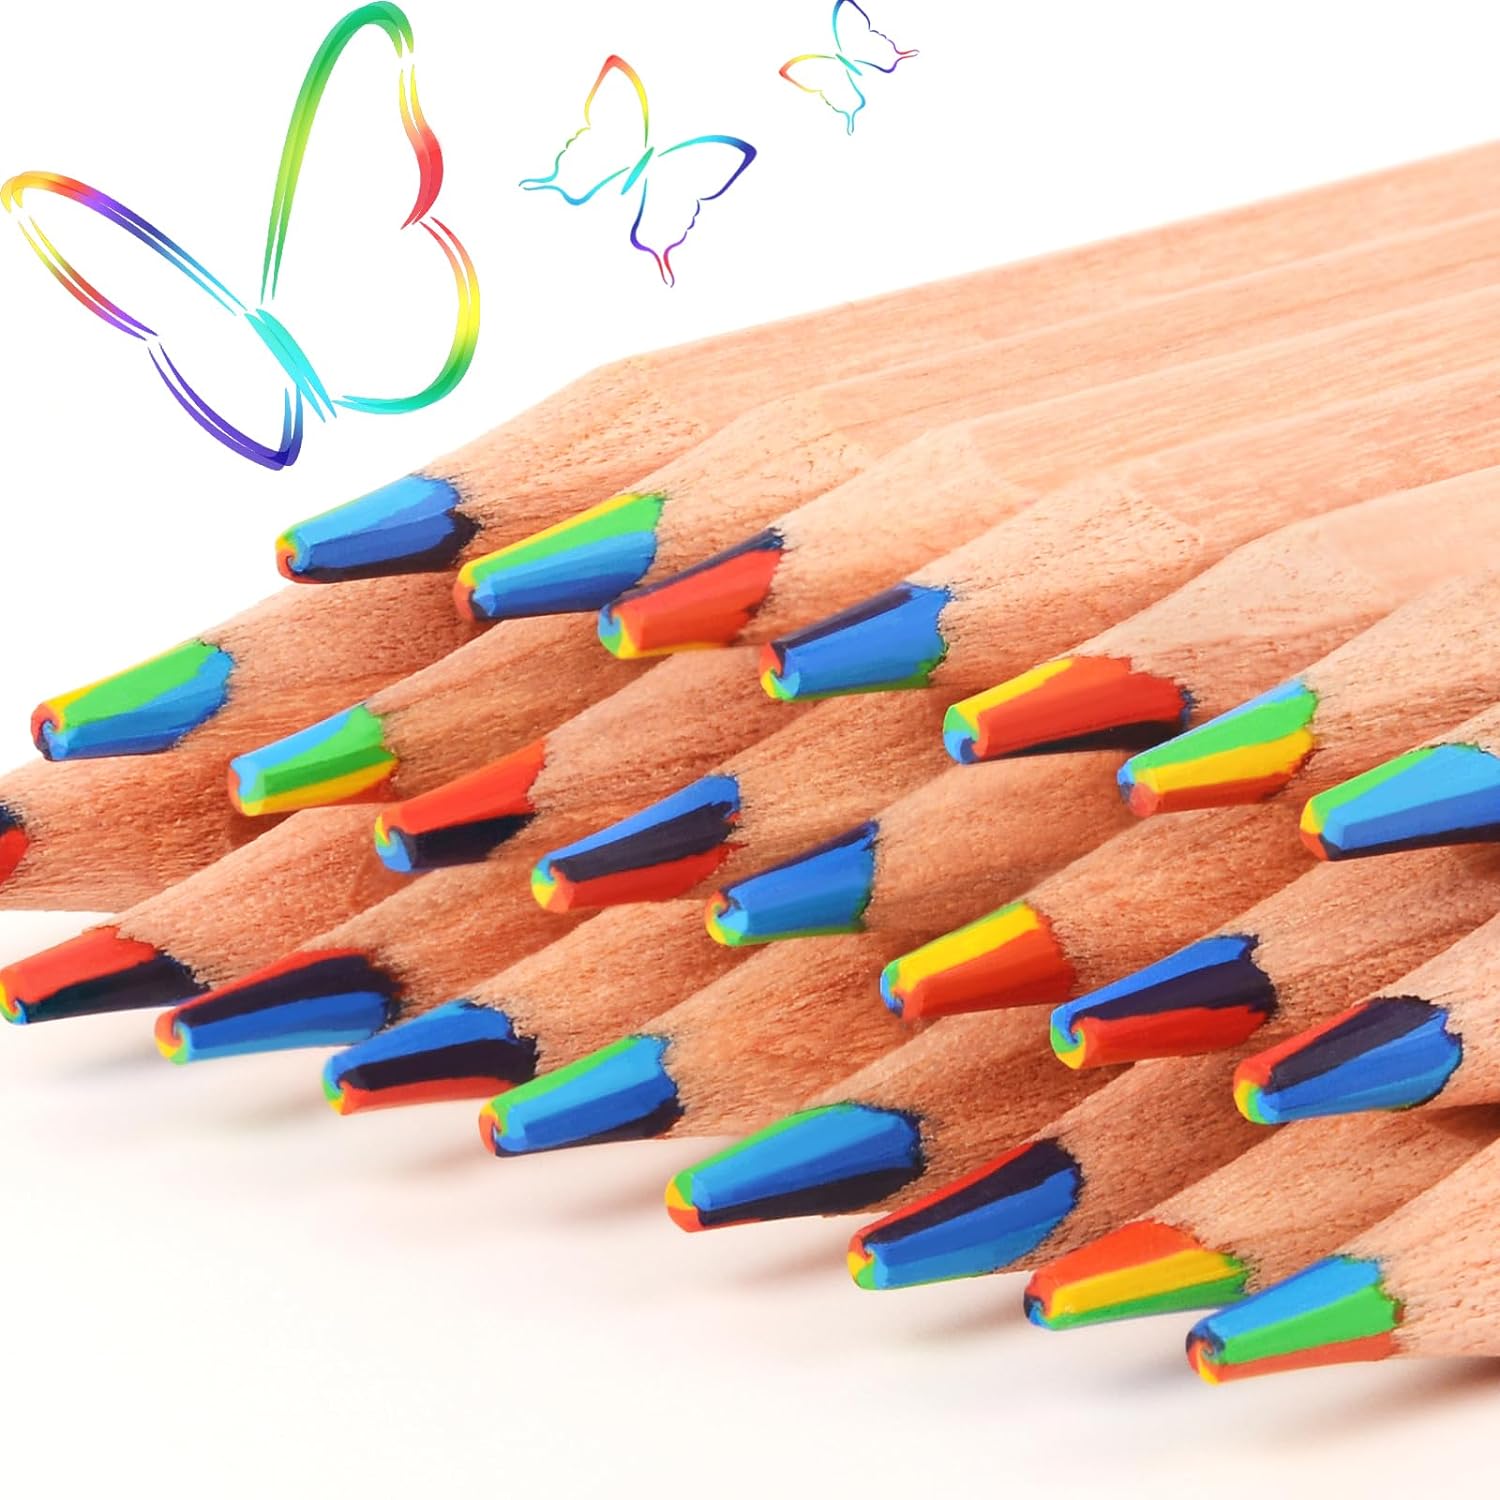 30PCS Wooden 7IN1 Rainbow Colored Art Drawing Pencils